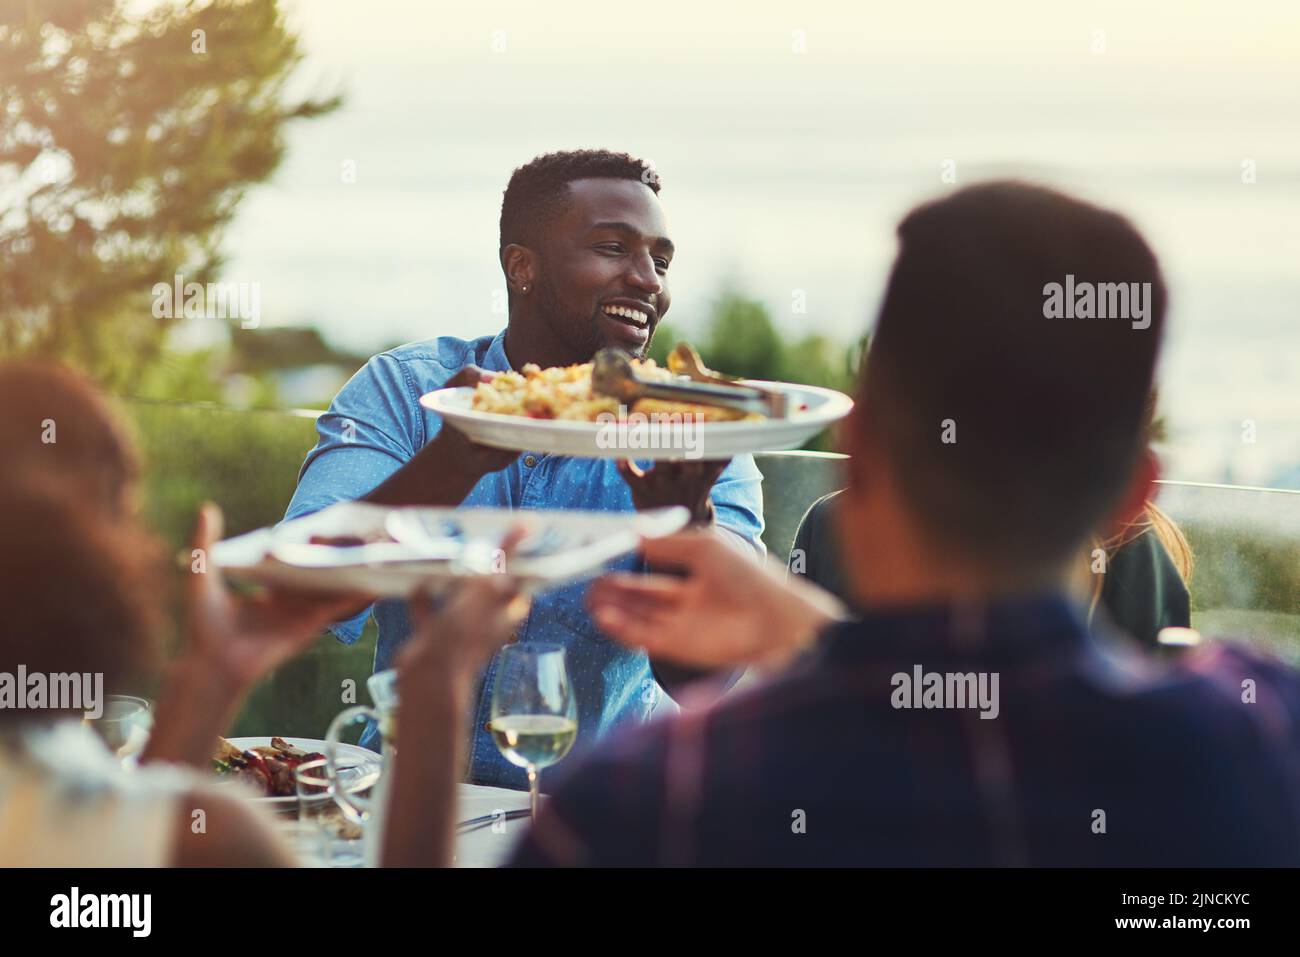 Heres some more for you mate. a handsome young man passing a plate of pasta around at a gathering with friends outdoors. Stock Photo